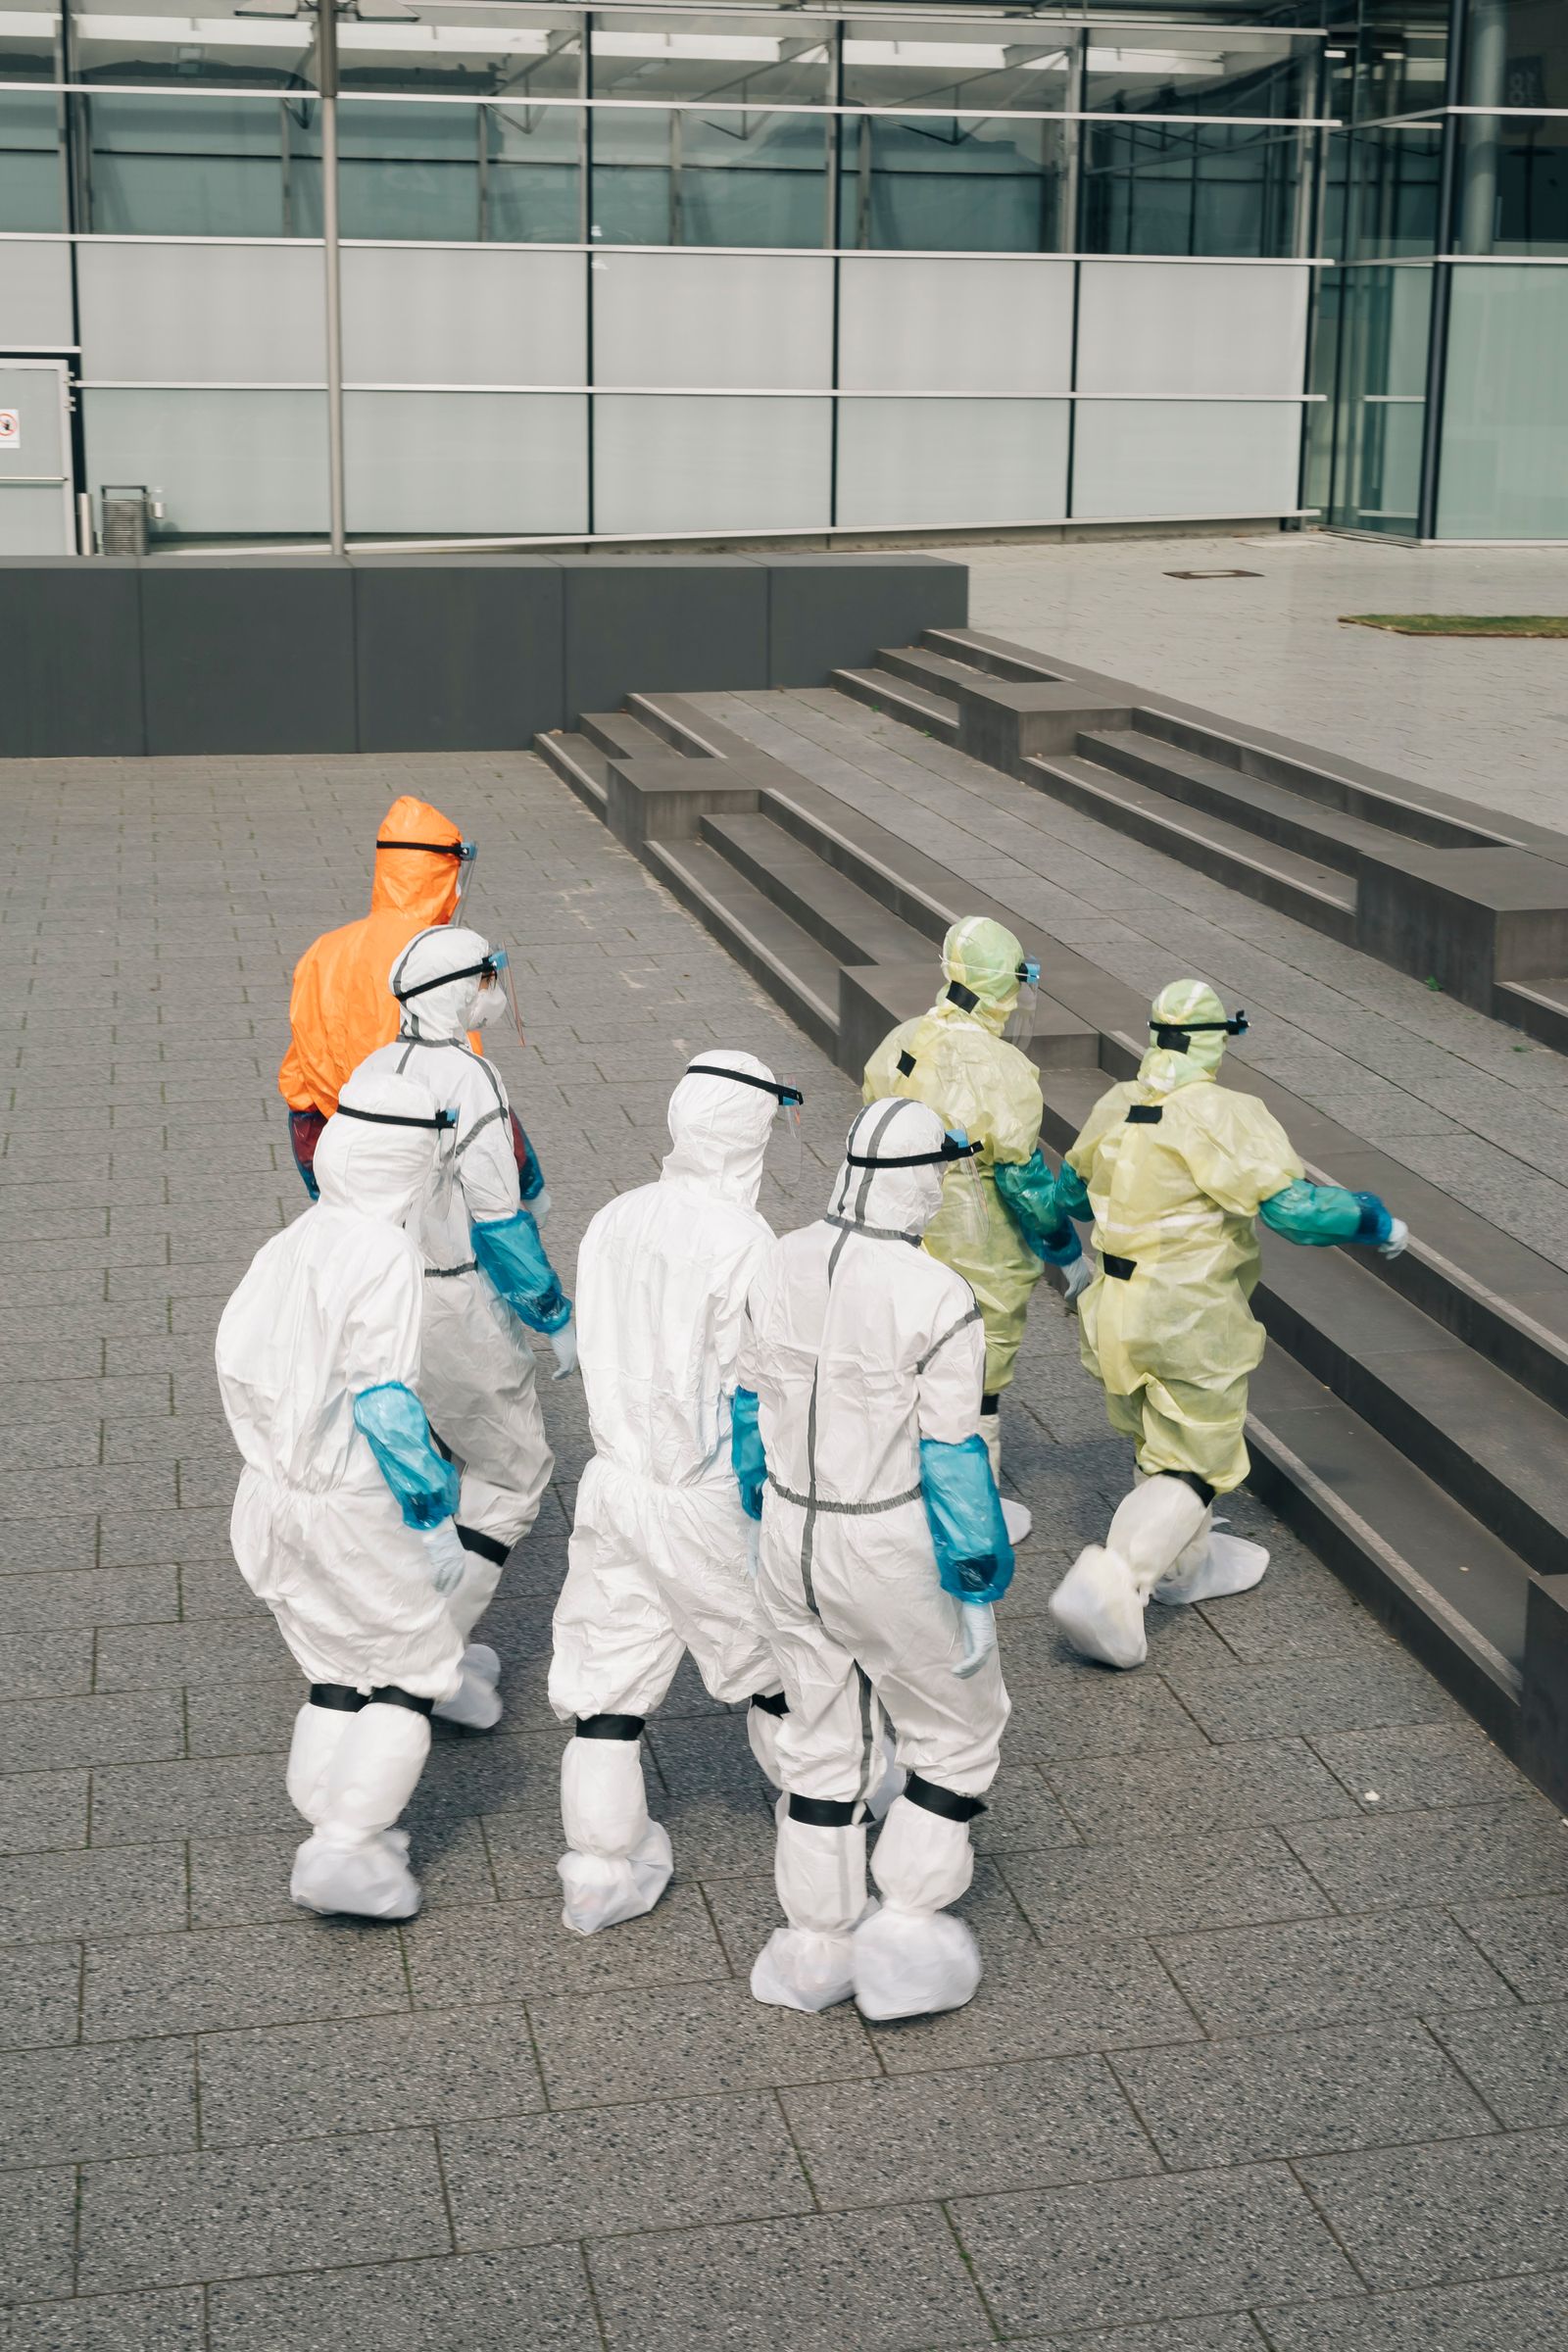 © Rafael Heygster - soldiers on the way to an exercise at a makeshift hospital in the exhibition halls in Hannover